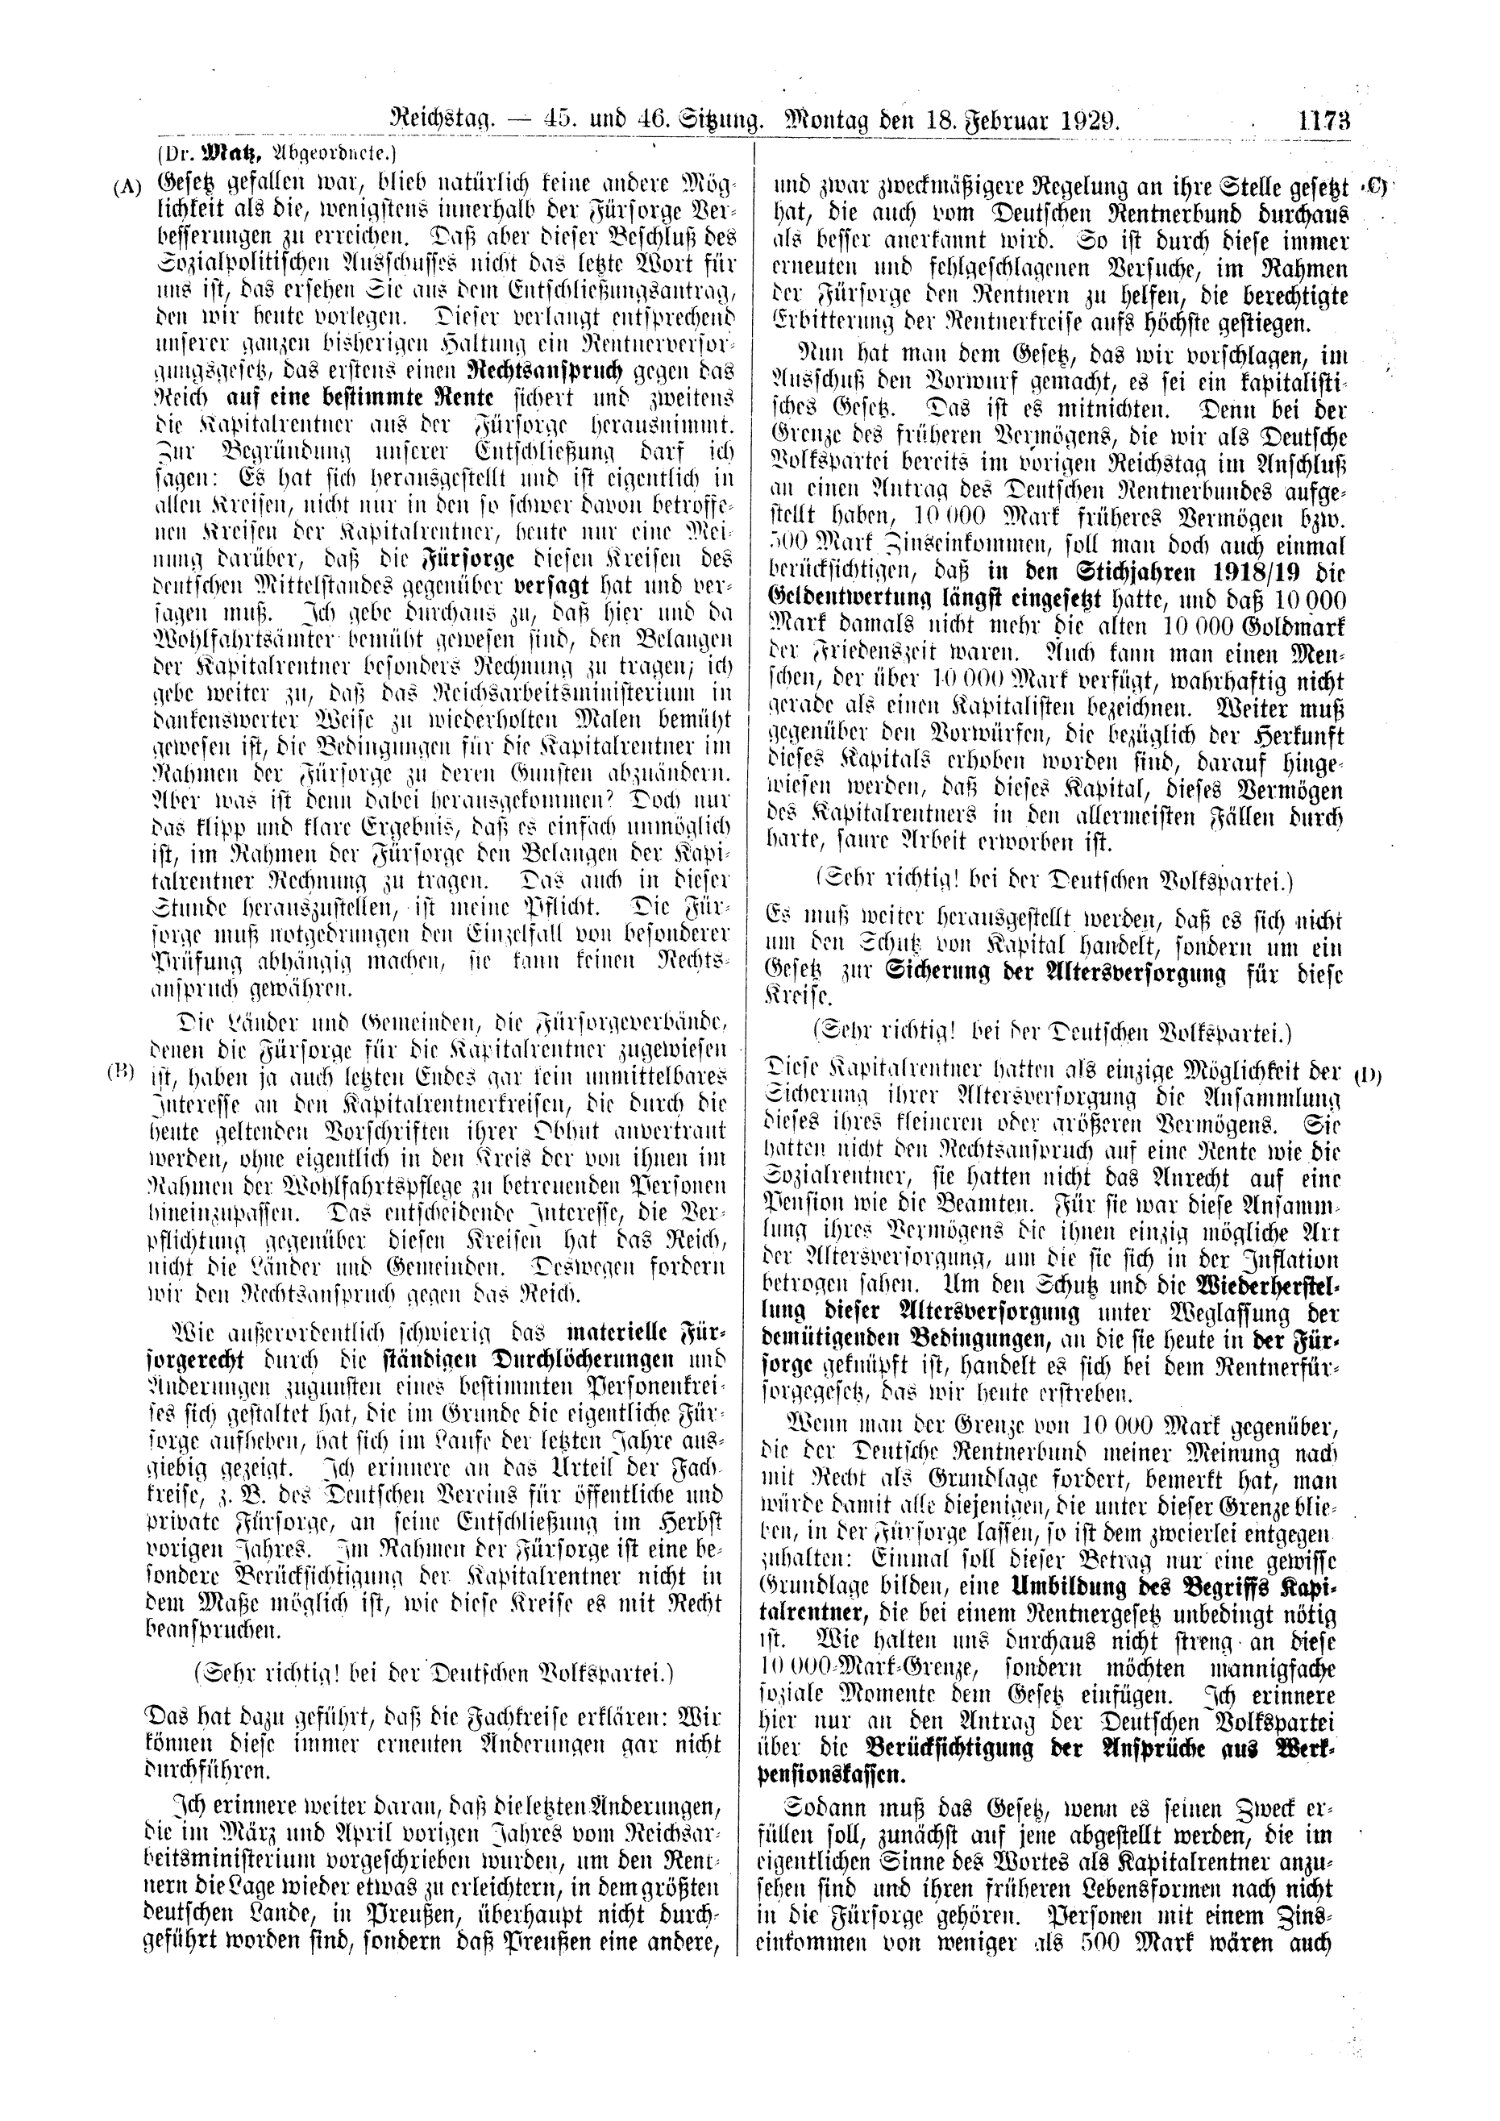 Scan of page 1173